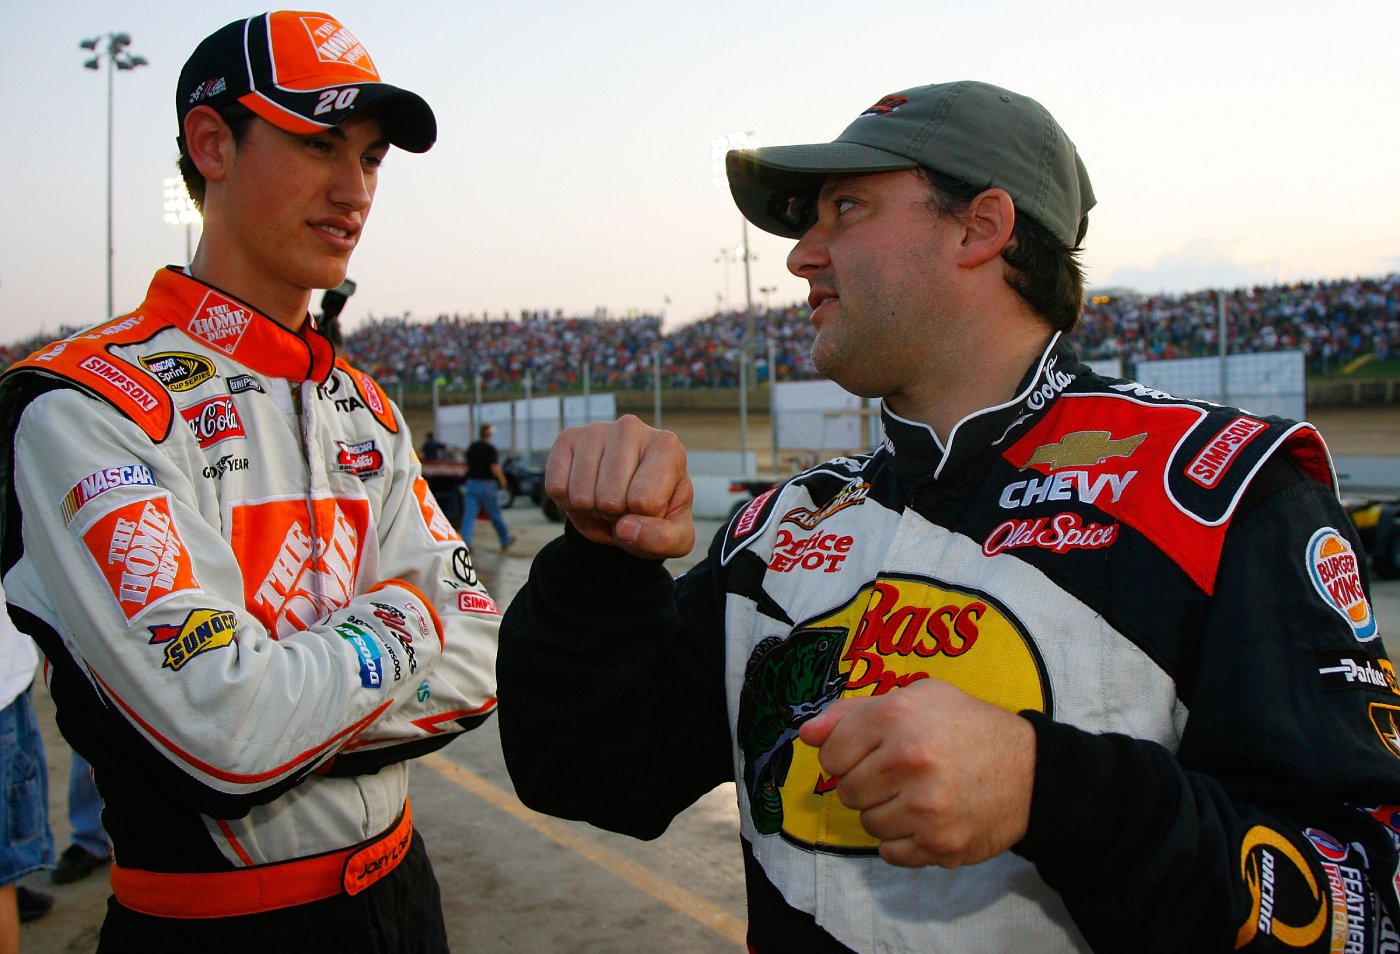 Tony Stewart is a NASCAR legend. However, Joey Logano wasn't too afraid of his legendary status, which led to a stern response from Stewart.